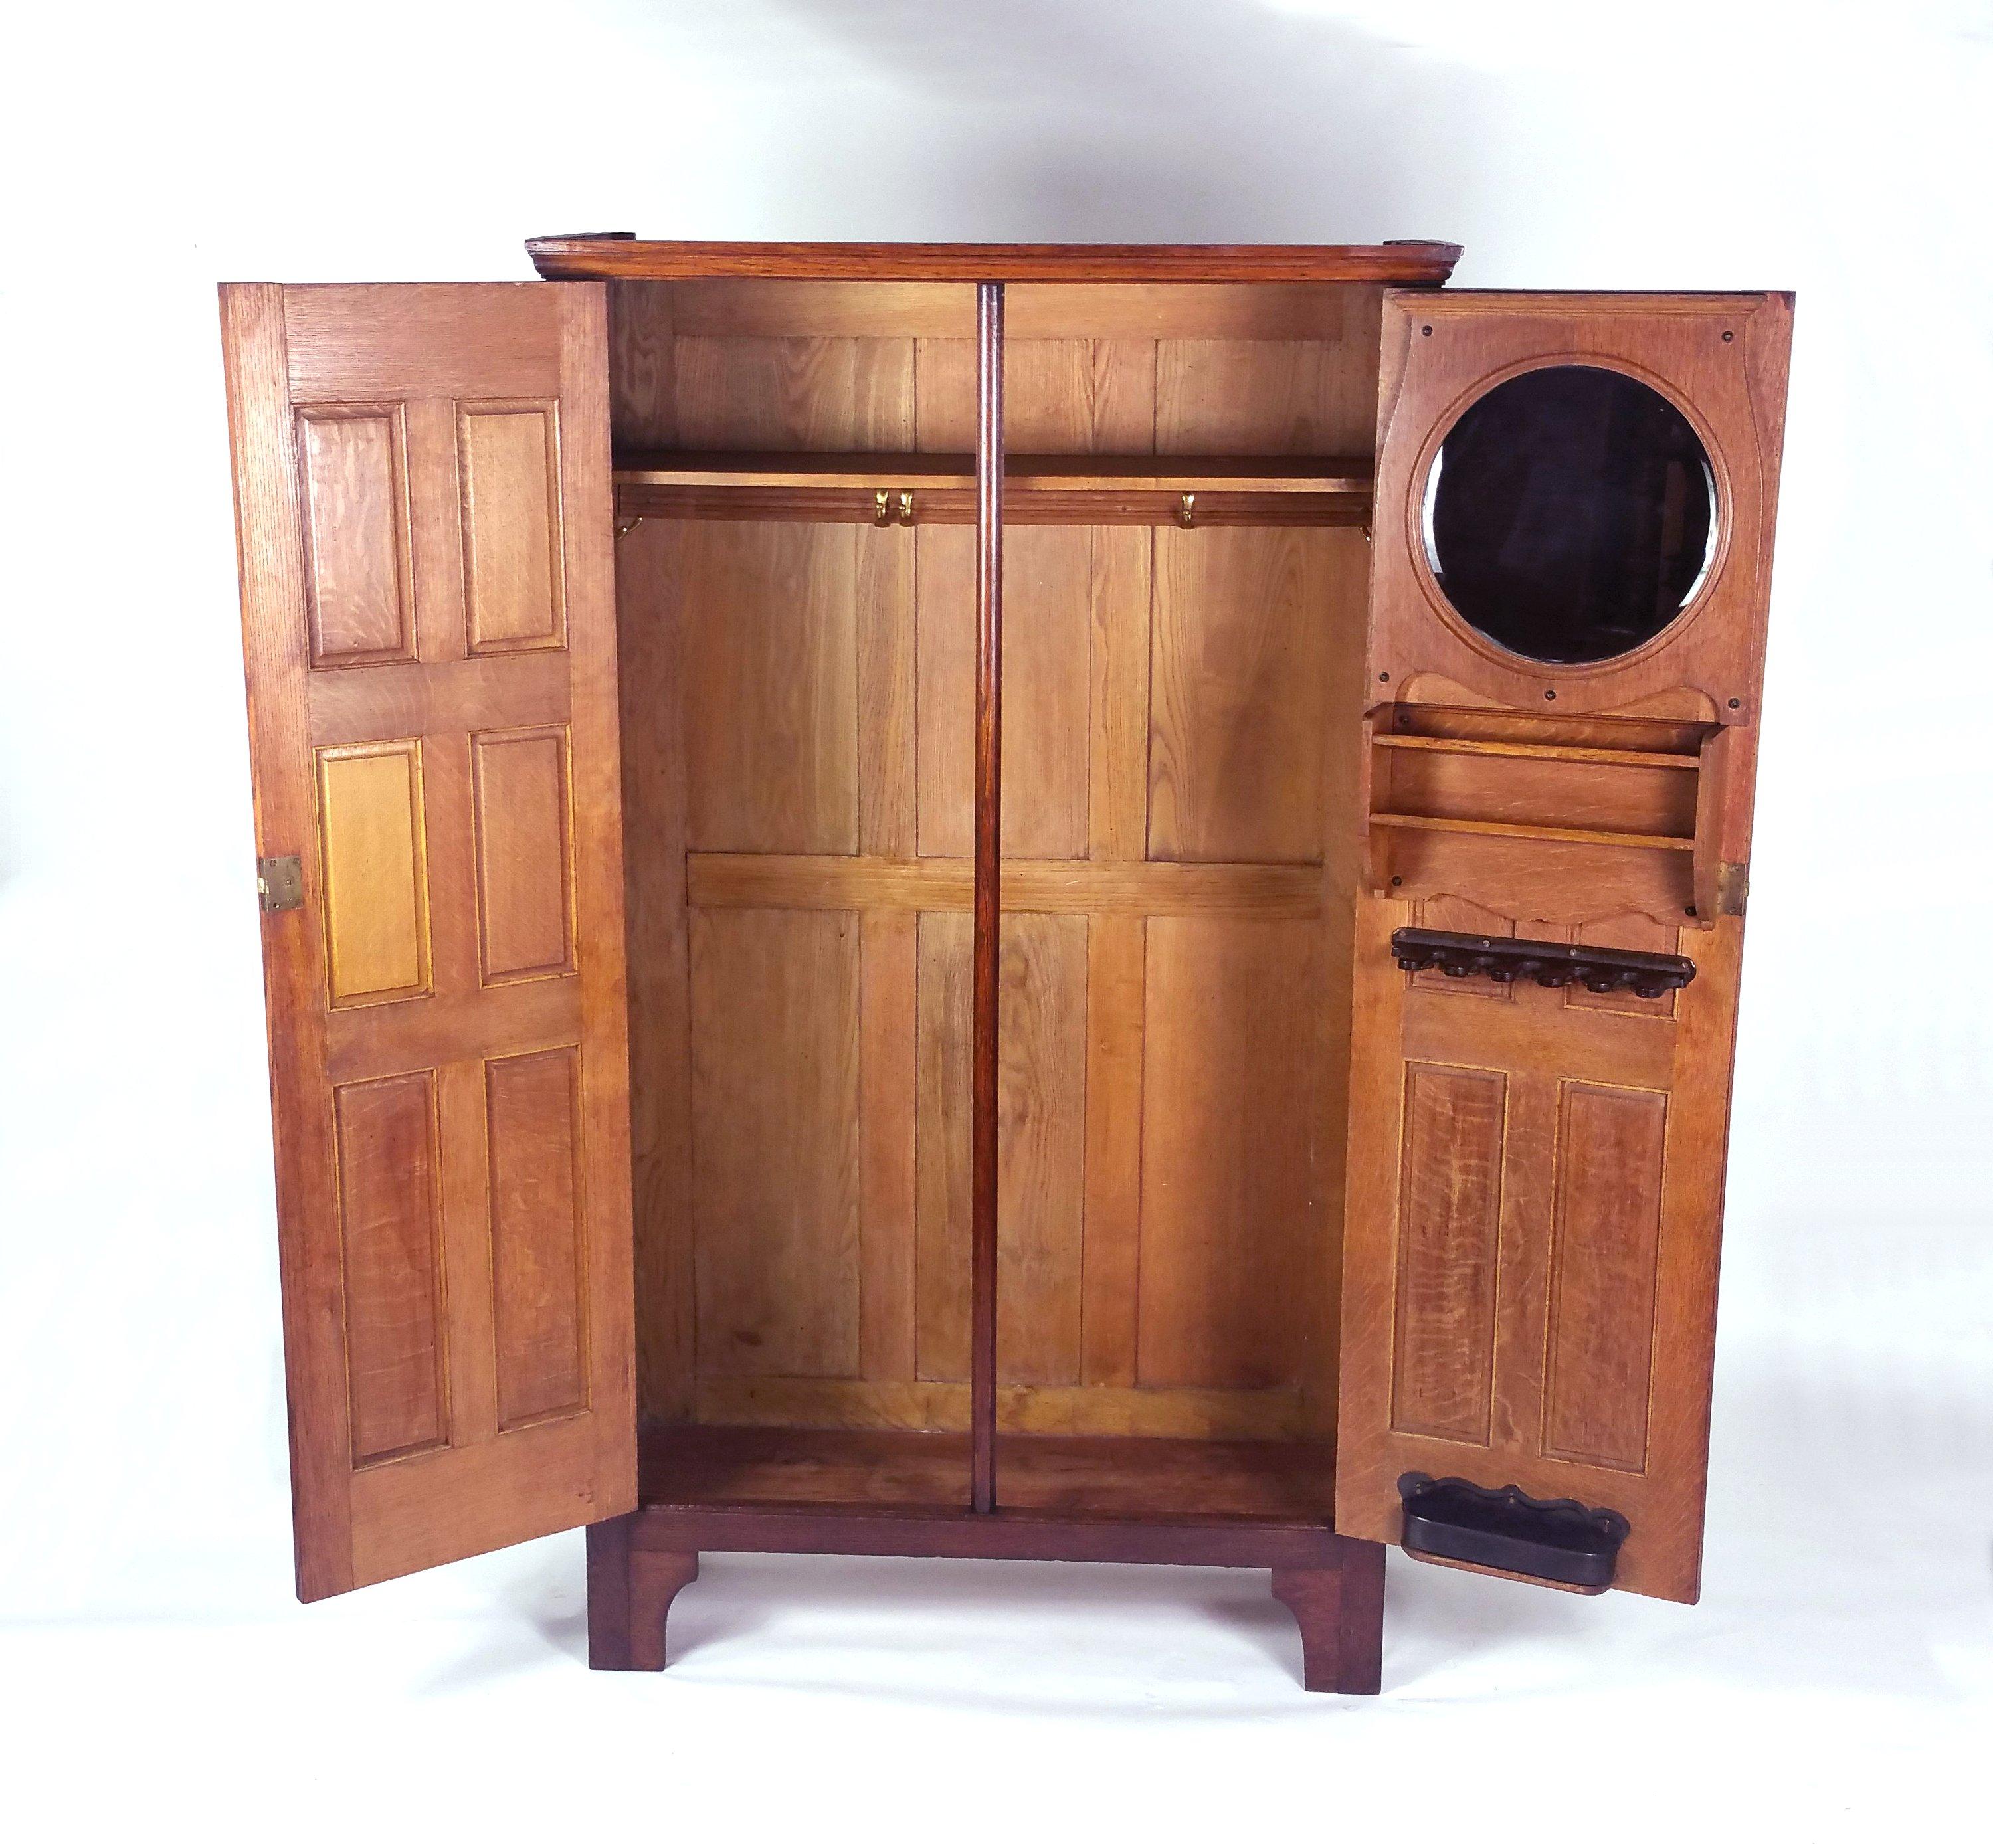 English Late 19th Century Arts & Crafts Two-Door Hall Wardrobe with Ornate Mounts